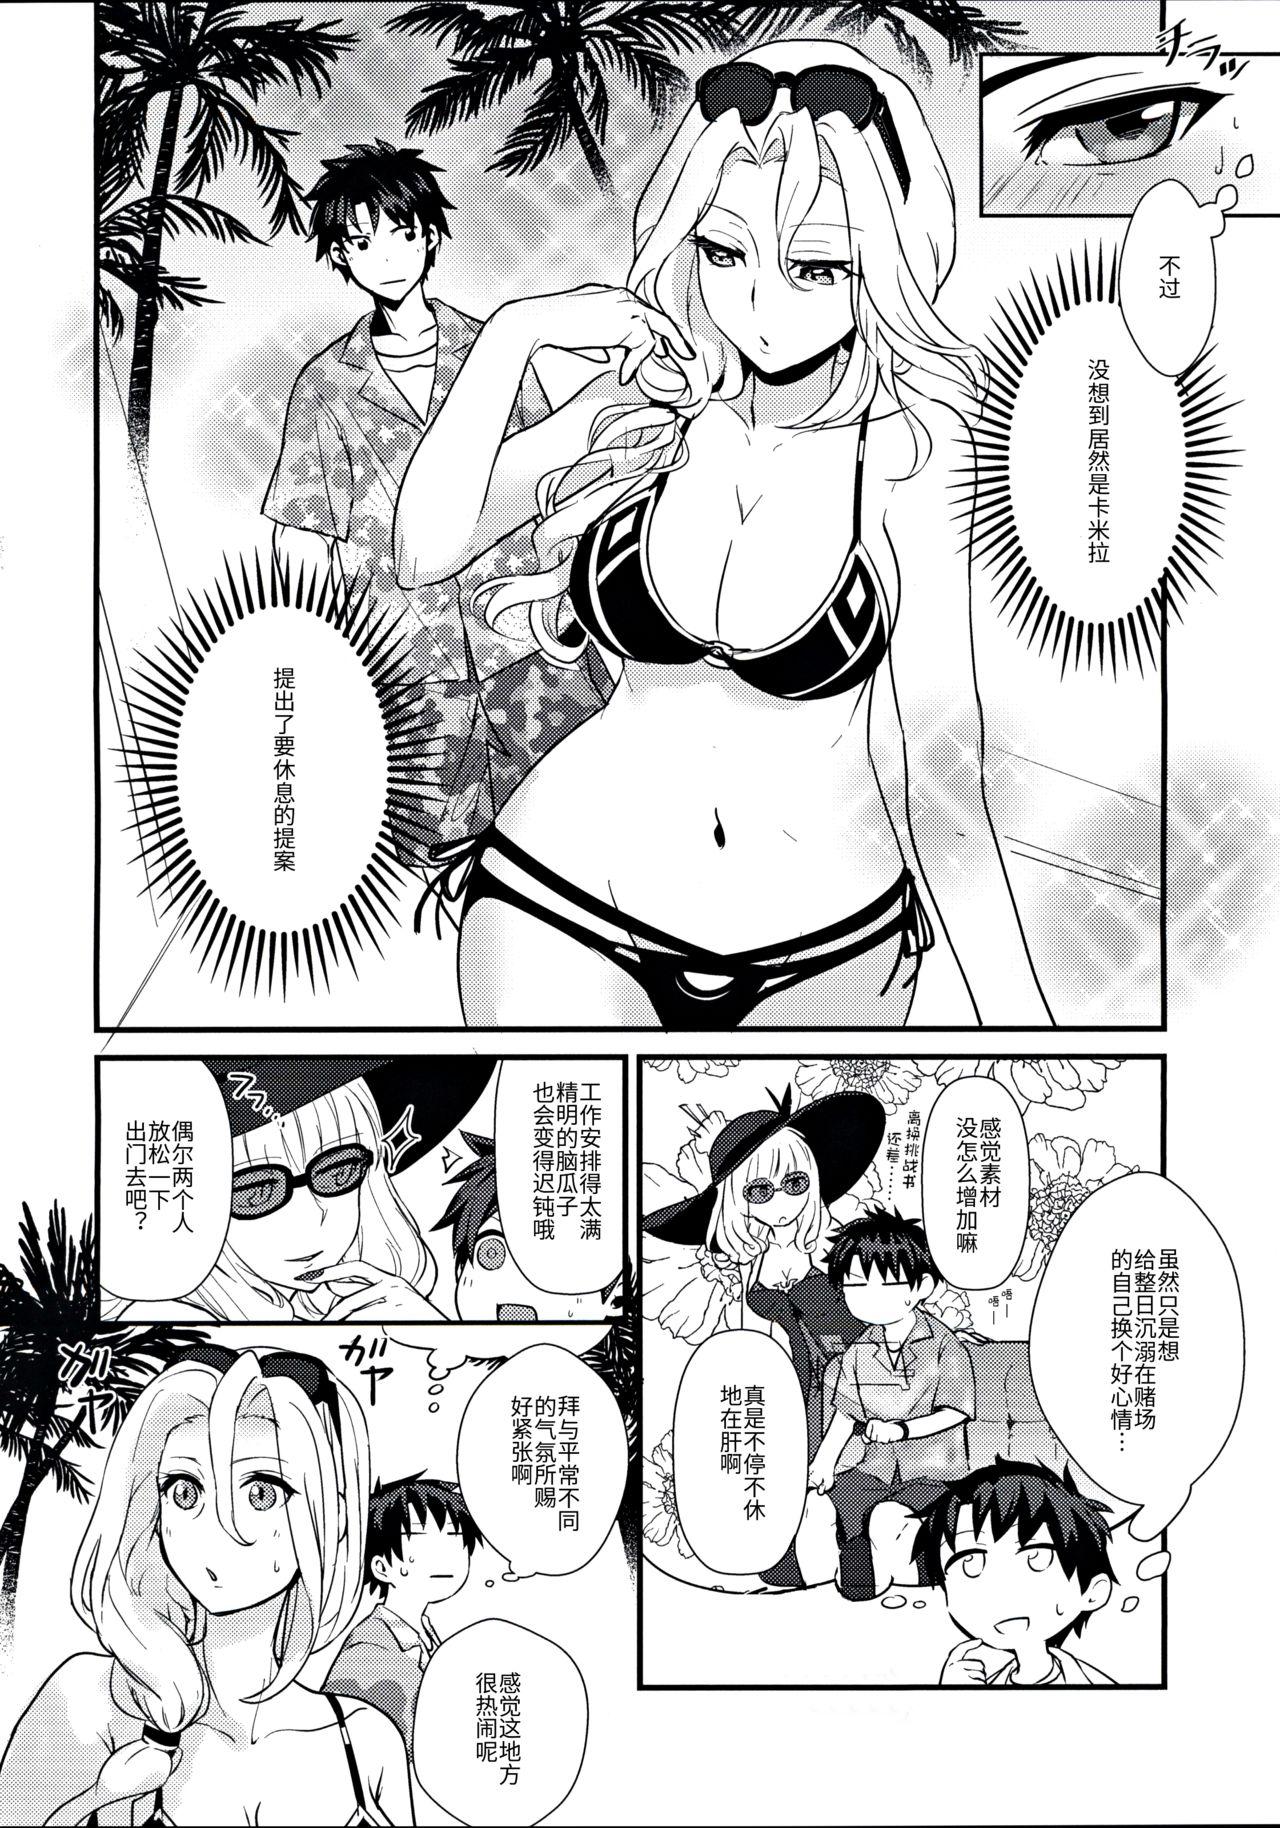 Bucetinha POOL SIDE MIRAGE - Fate grand order HD - Page 4